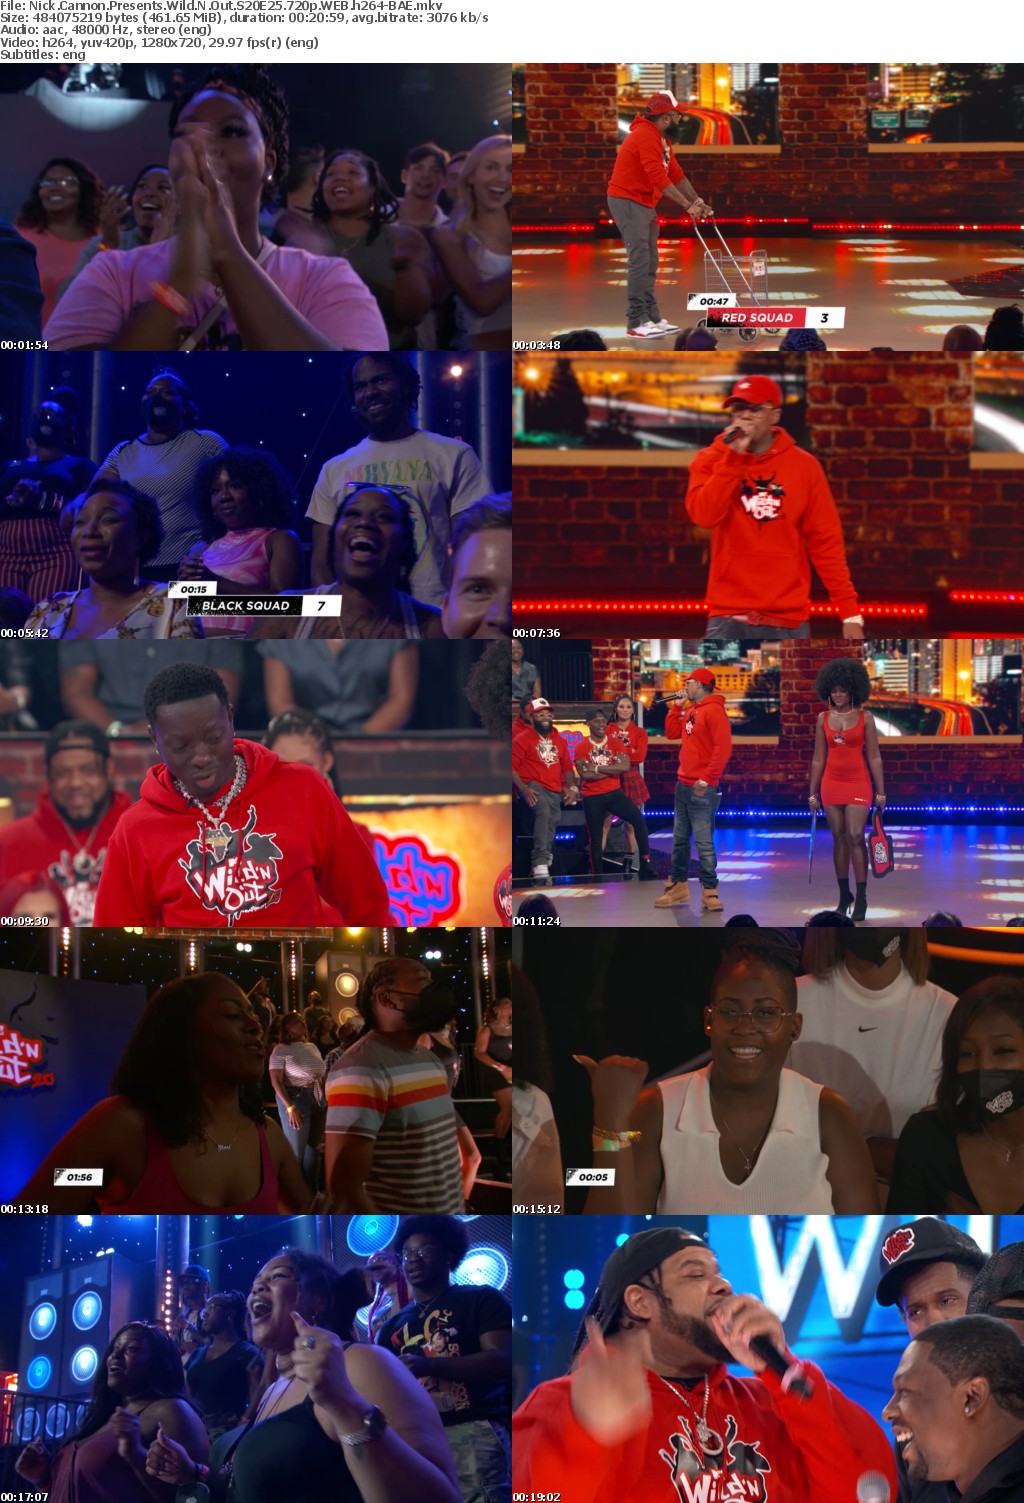 Nick Cannon Presents Wild N Out S20E25 720p WEB h264-BAE